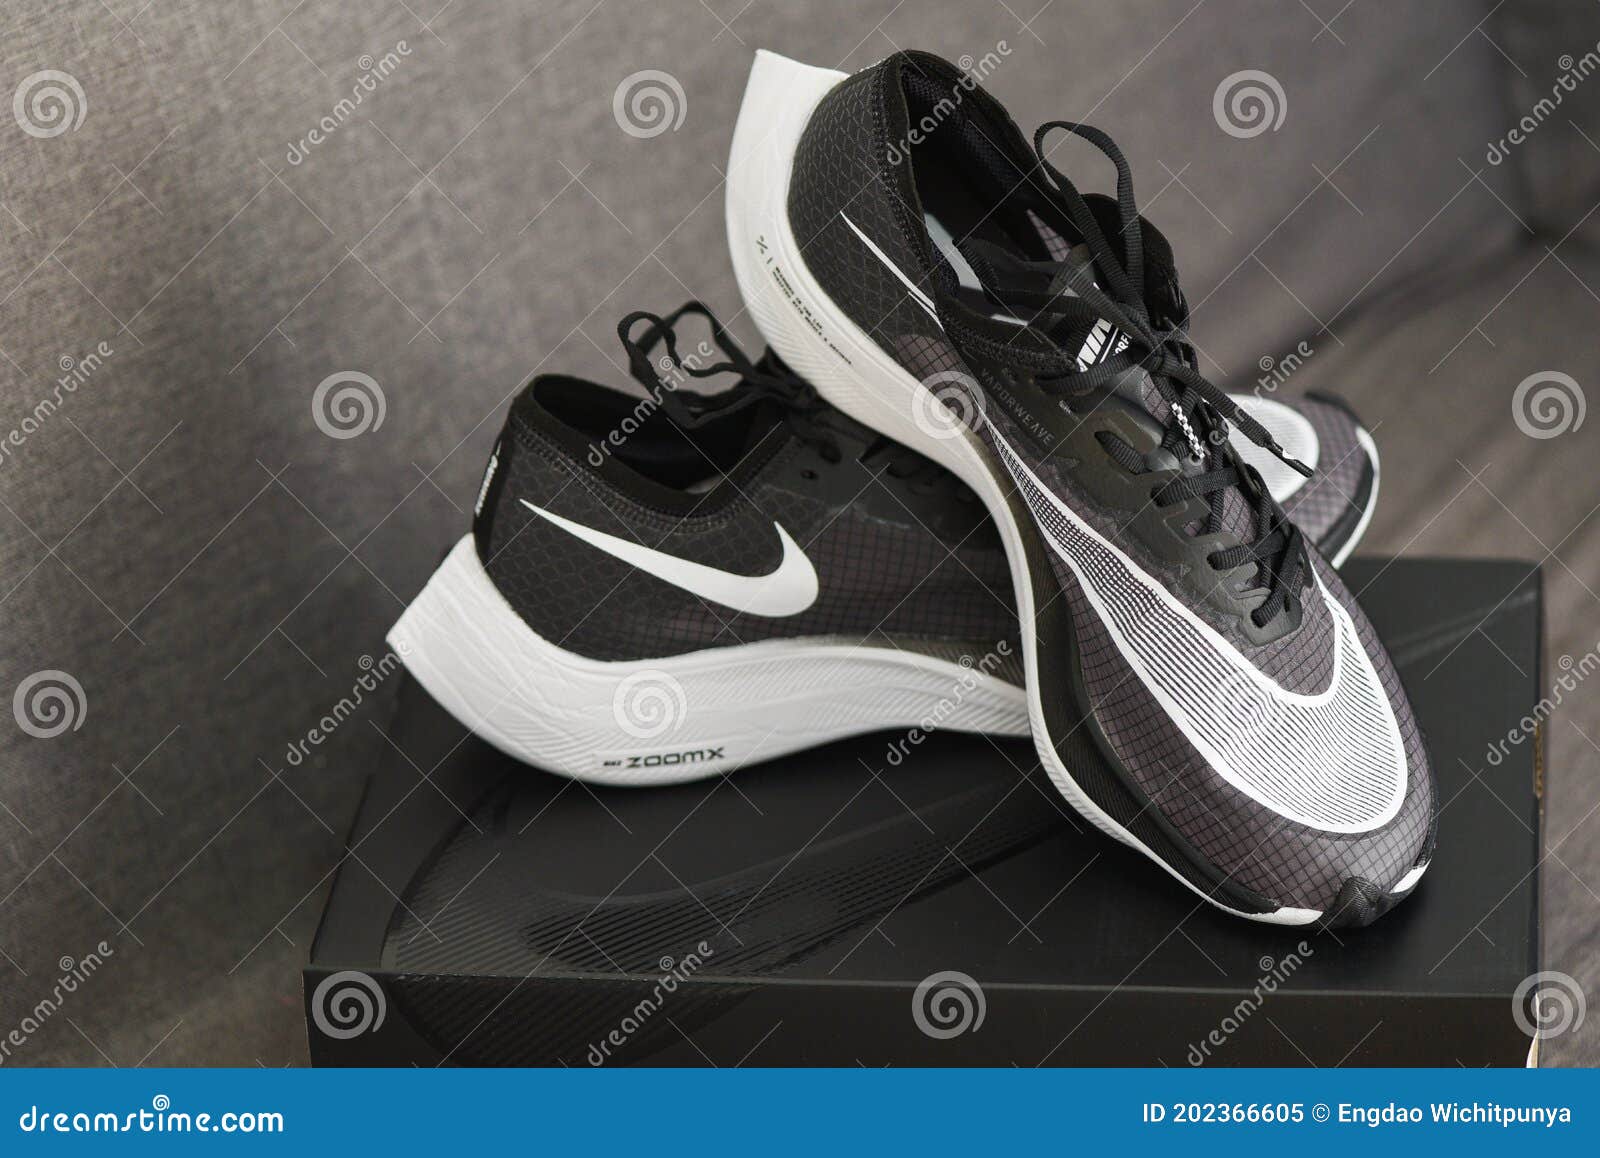 Nike Running Shoes, Nike Zoomx Vaporfly Next White-black Men`s Running  Shoes on Box in the Store Editorial Image - Image of clothing, athletic:  202366605